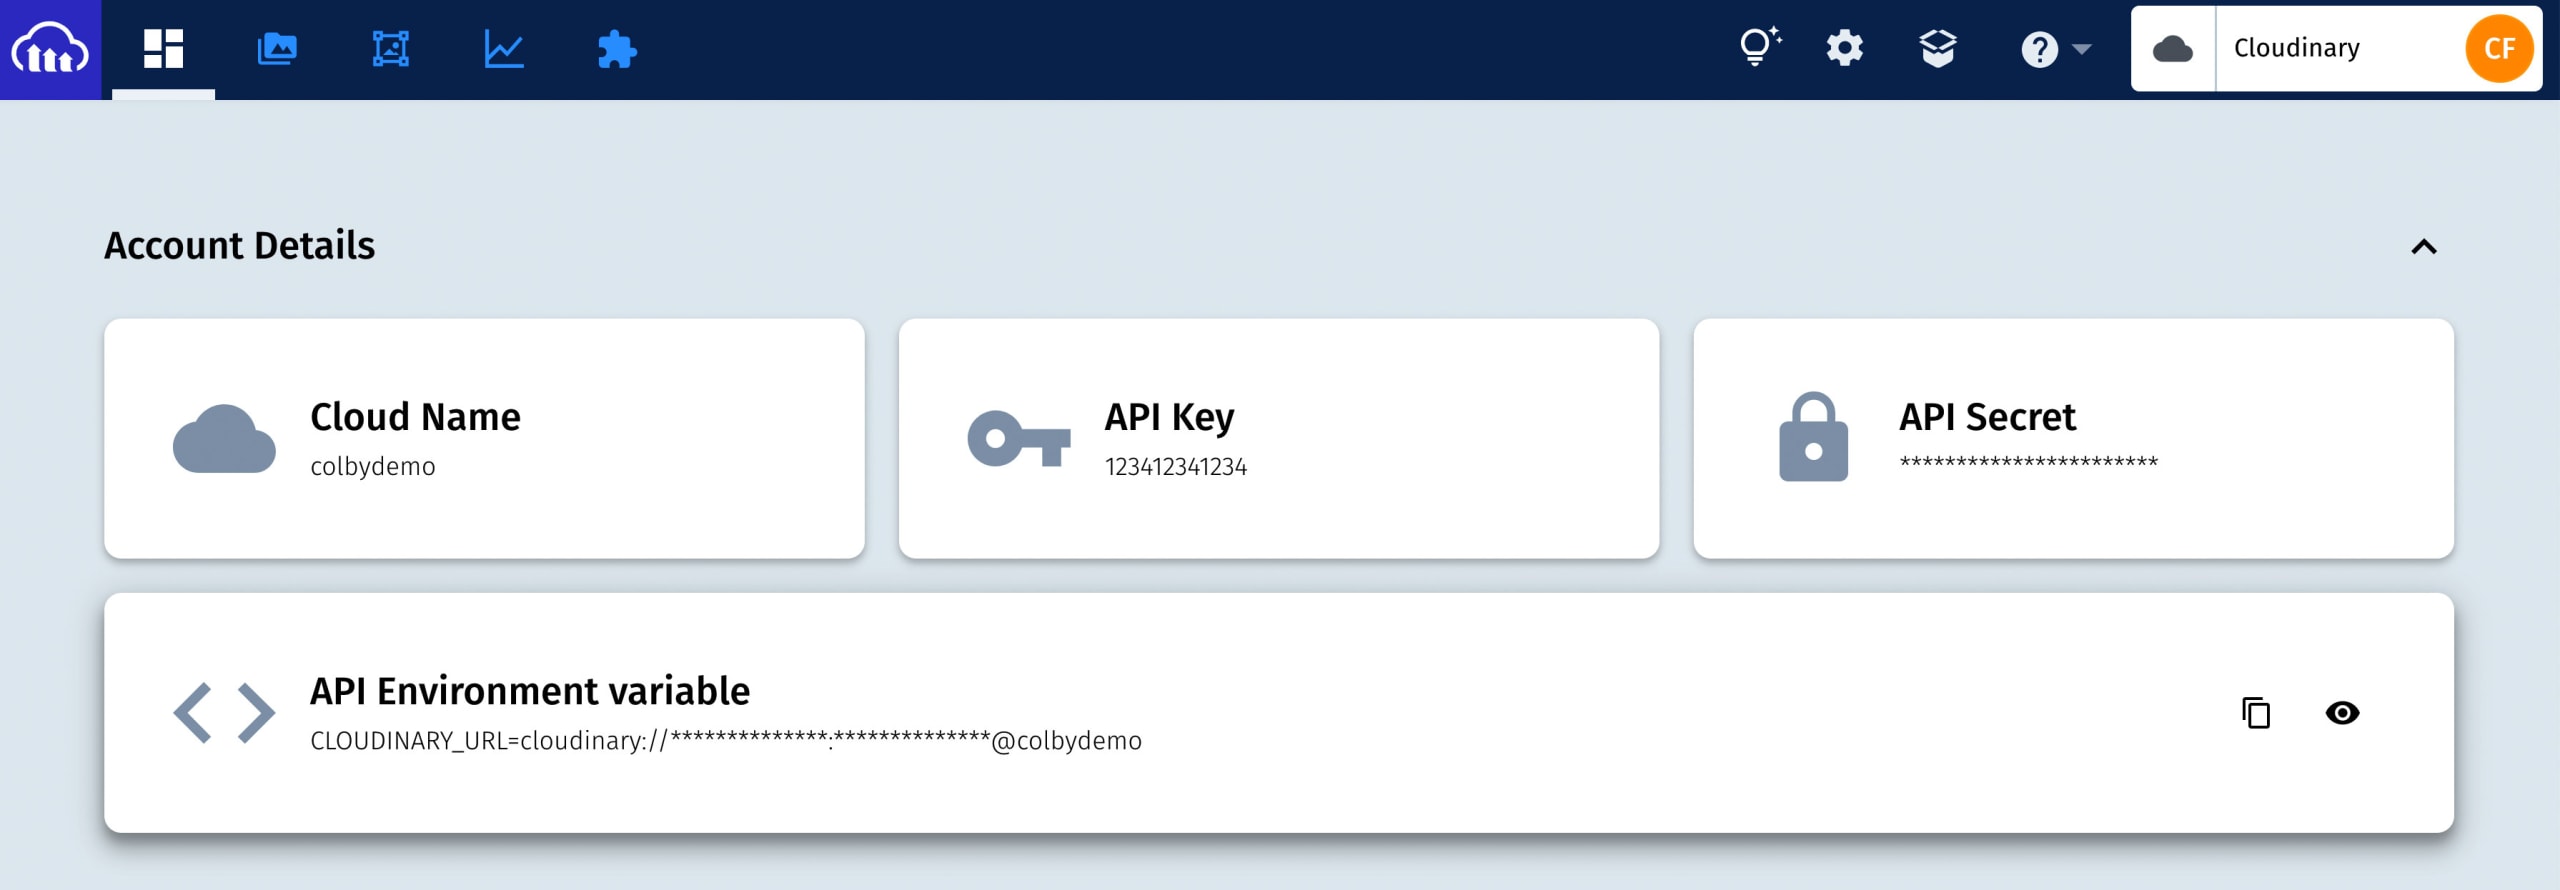 Cloudinary dashboard showing API Environment Variable and other account details